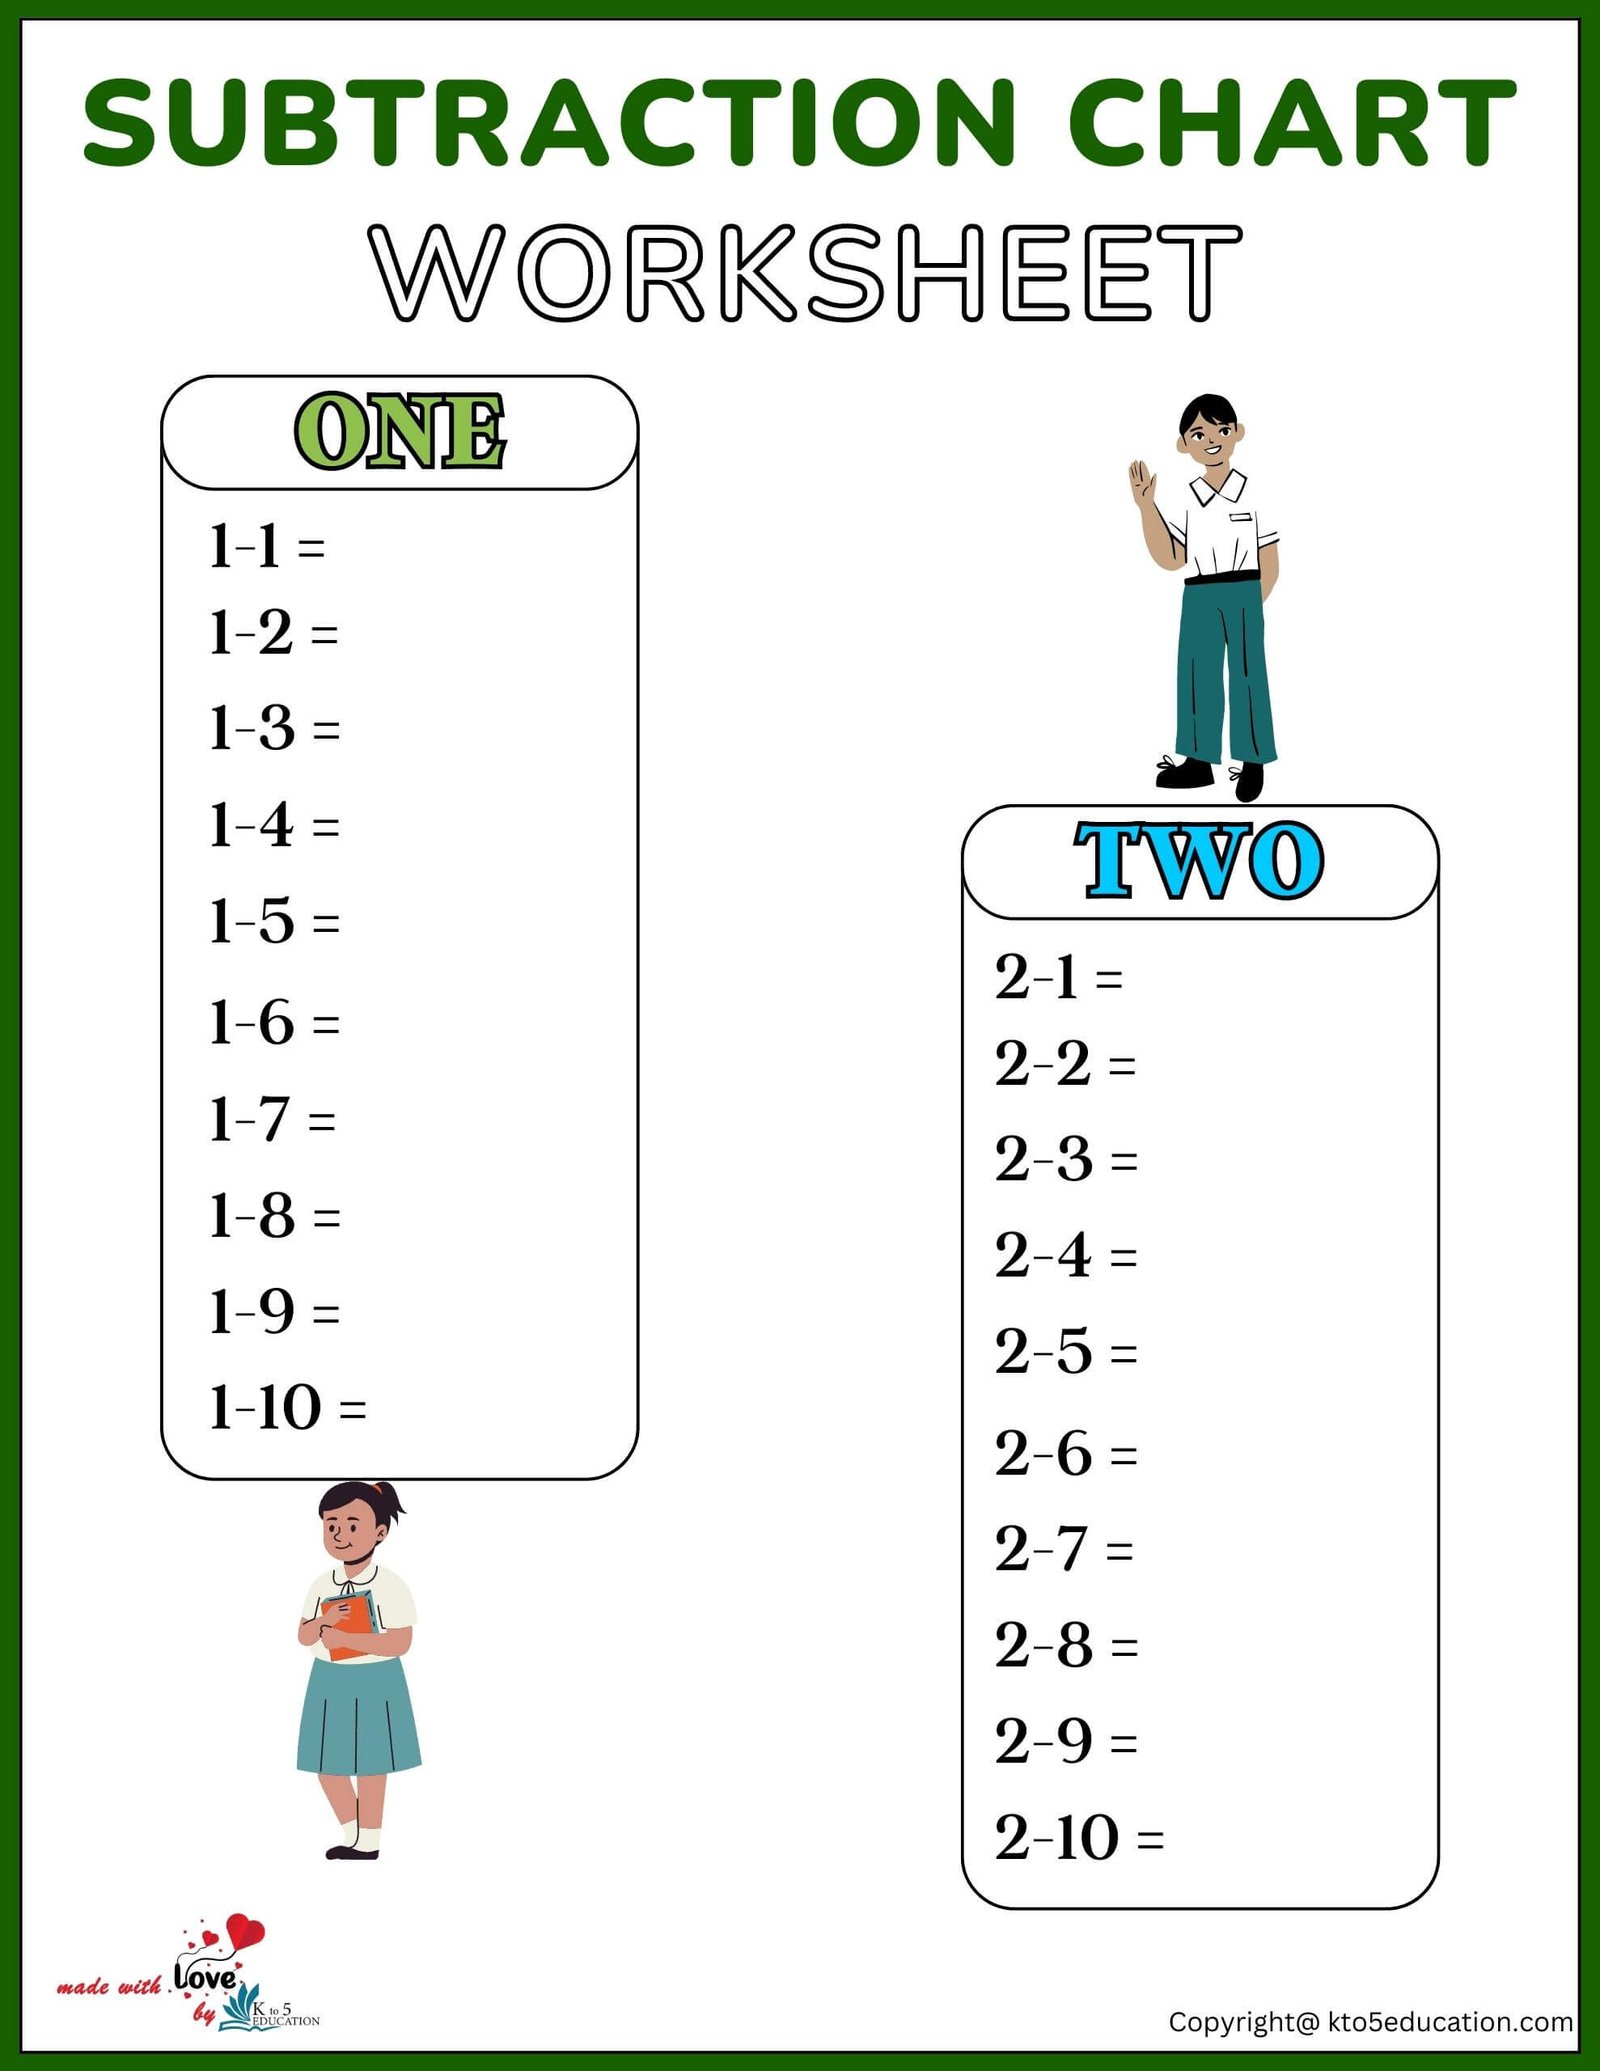 Subtractions Chart Worksheets